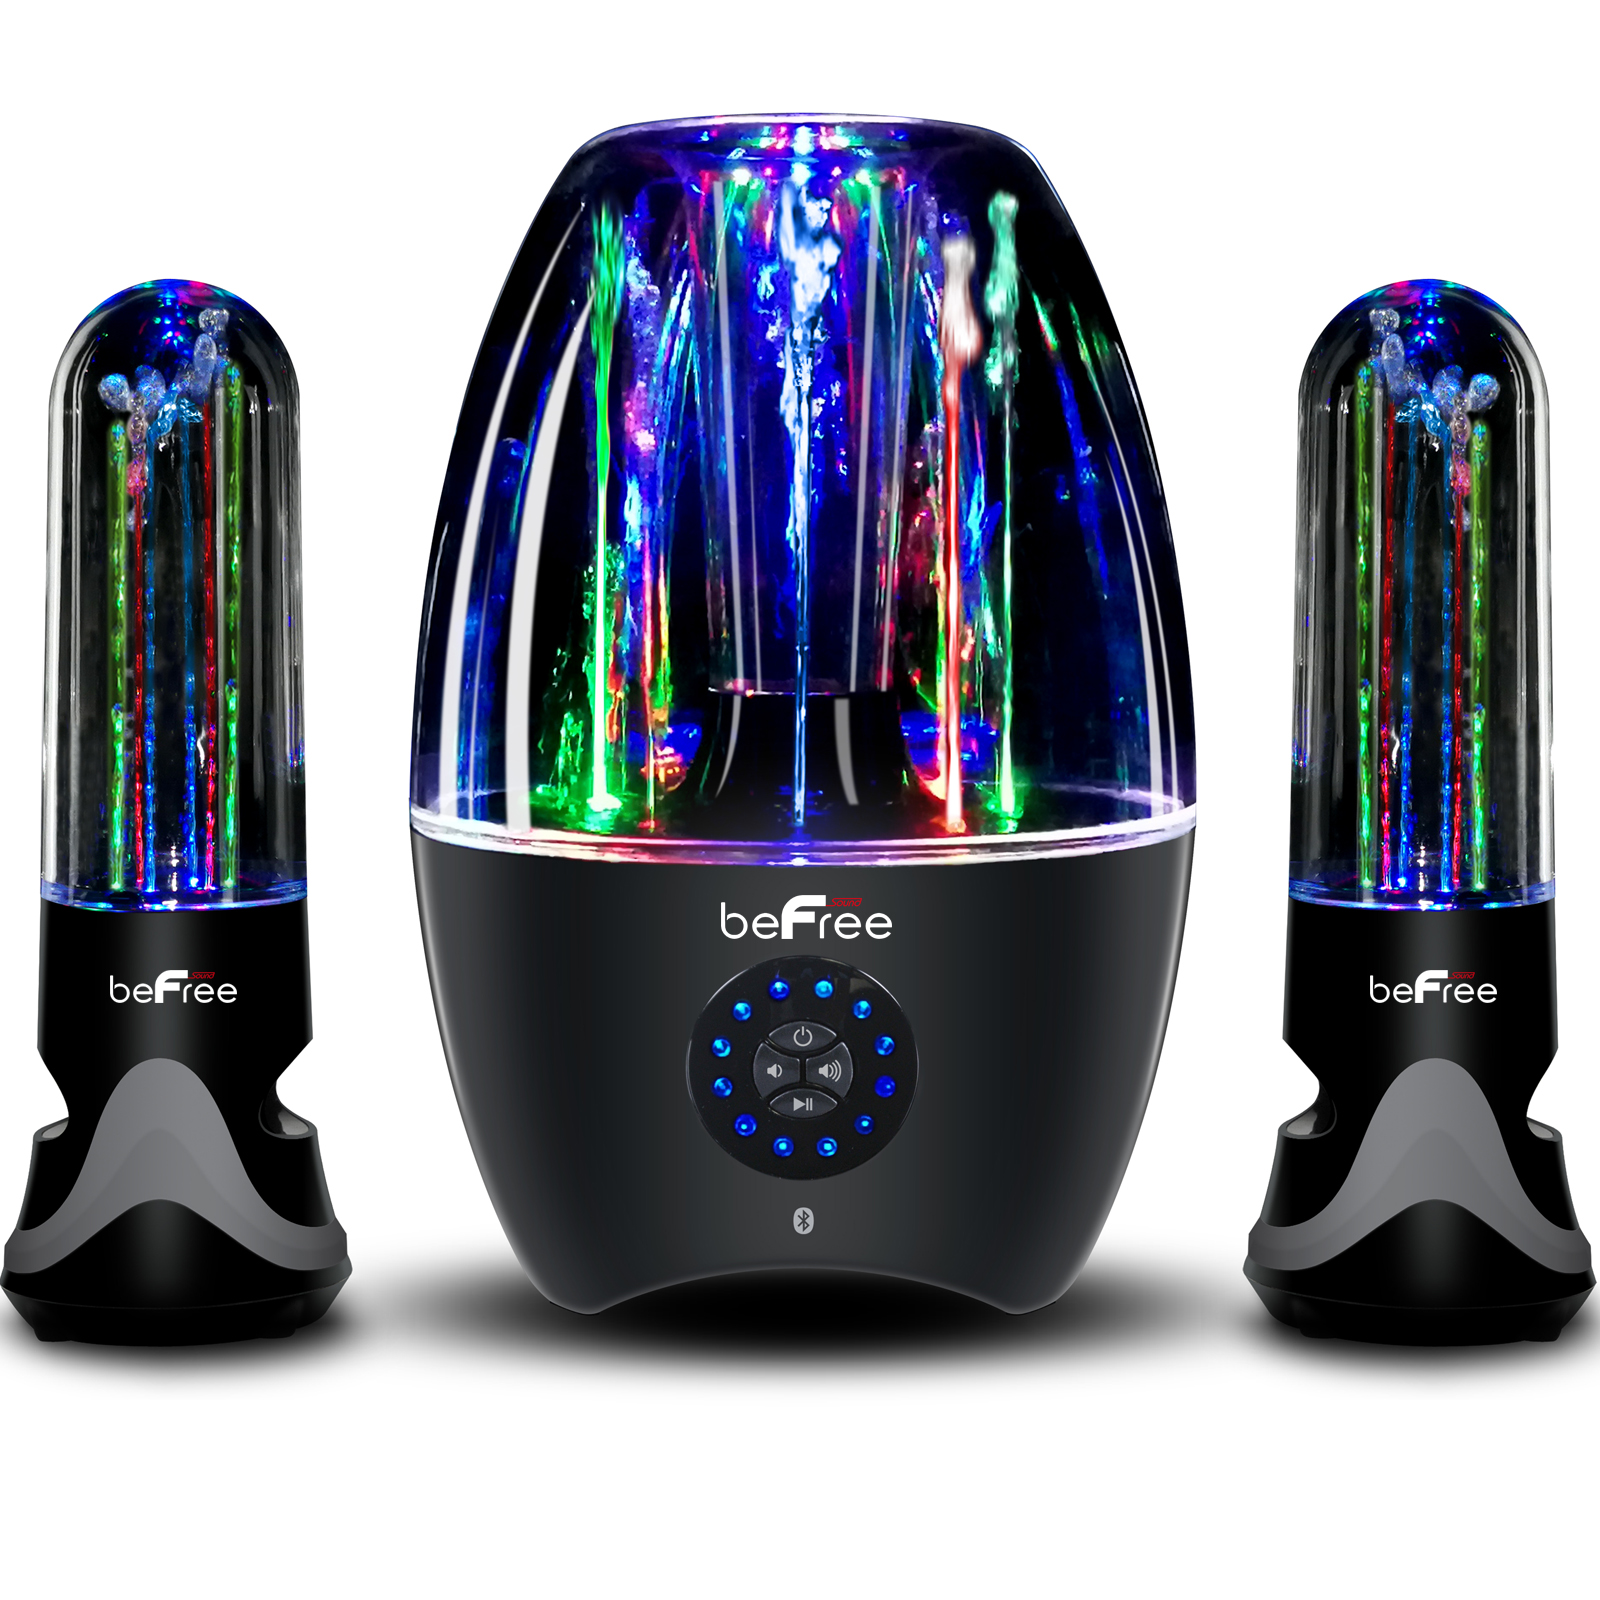 Befree Sound 970102699M 2.1 Channel Wireless Multimedia LED Dancing Water Bluetooth Sound System